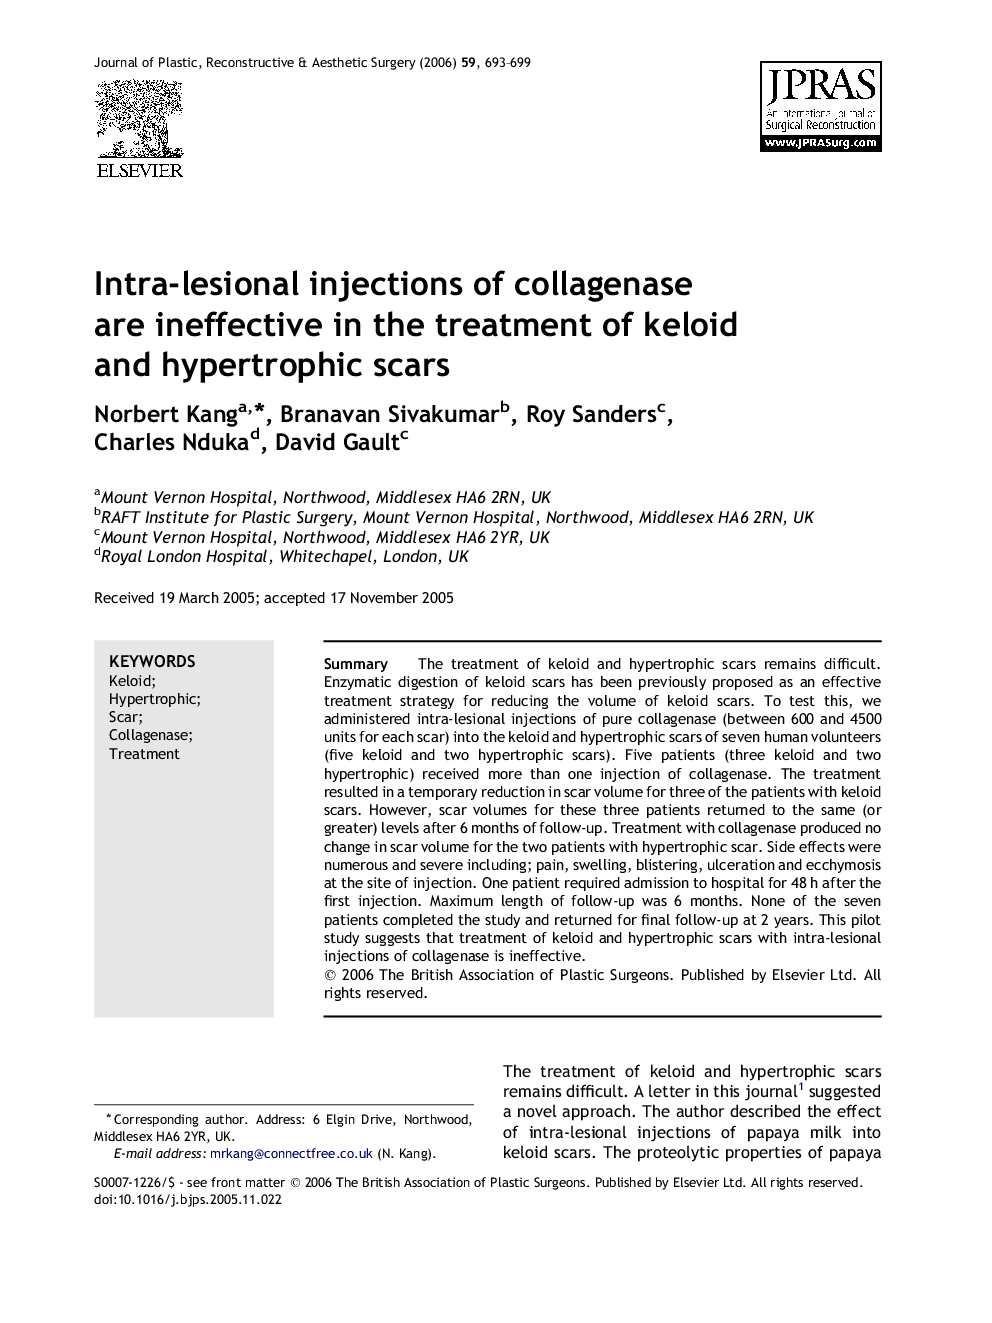 Intra-lesional injections of collagenase are ineffective in the treatment of keloid and hypertrophic scars